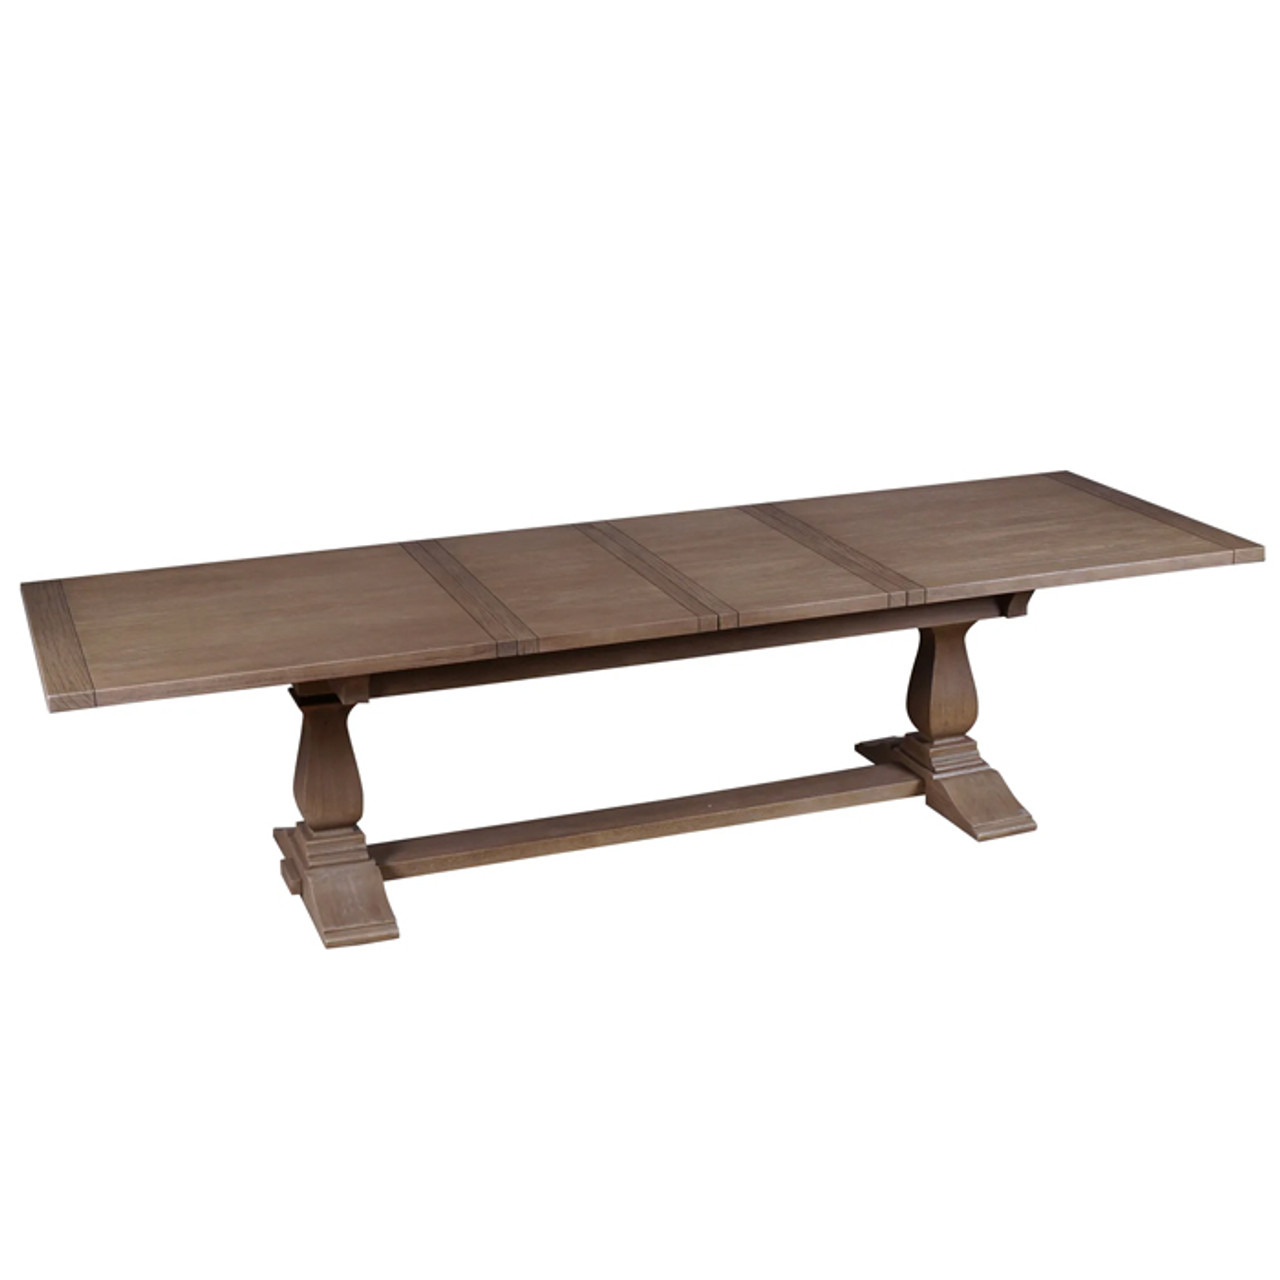 Selene 2 Ext Table – All Rustic Brown